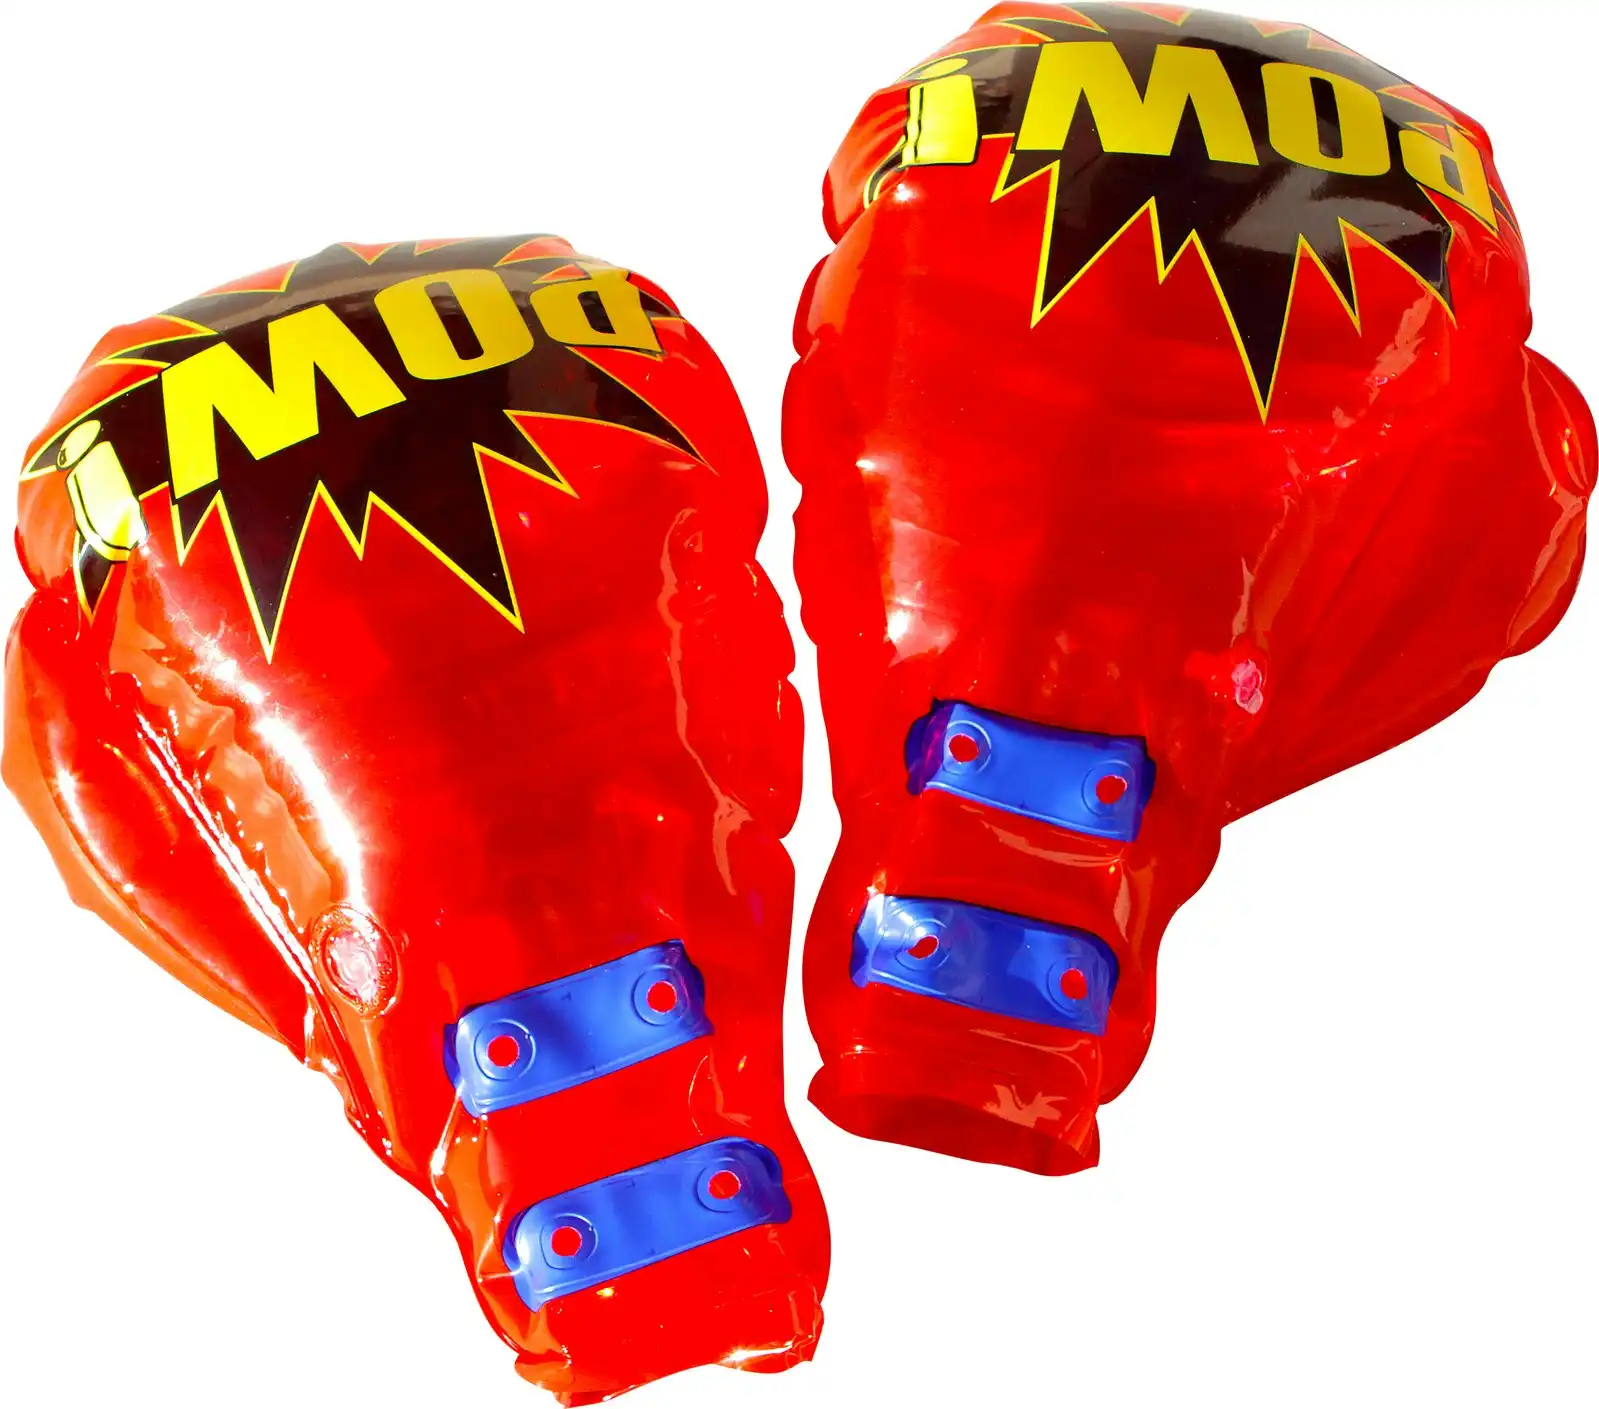 Airtime 36x25cm Boxing Glove Combo Inflatable 2 Pairs Pool/Beach Toy Red/Blue